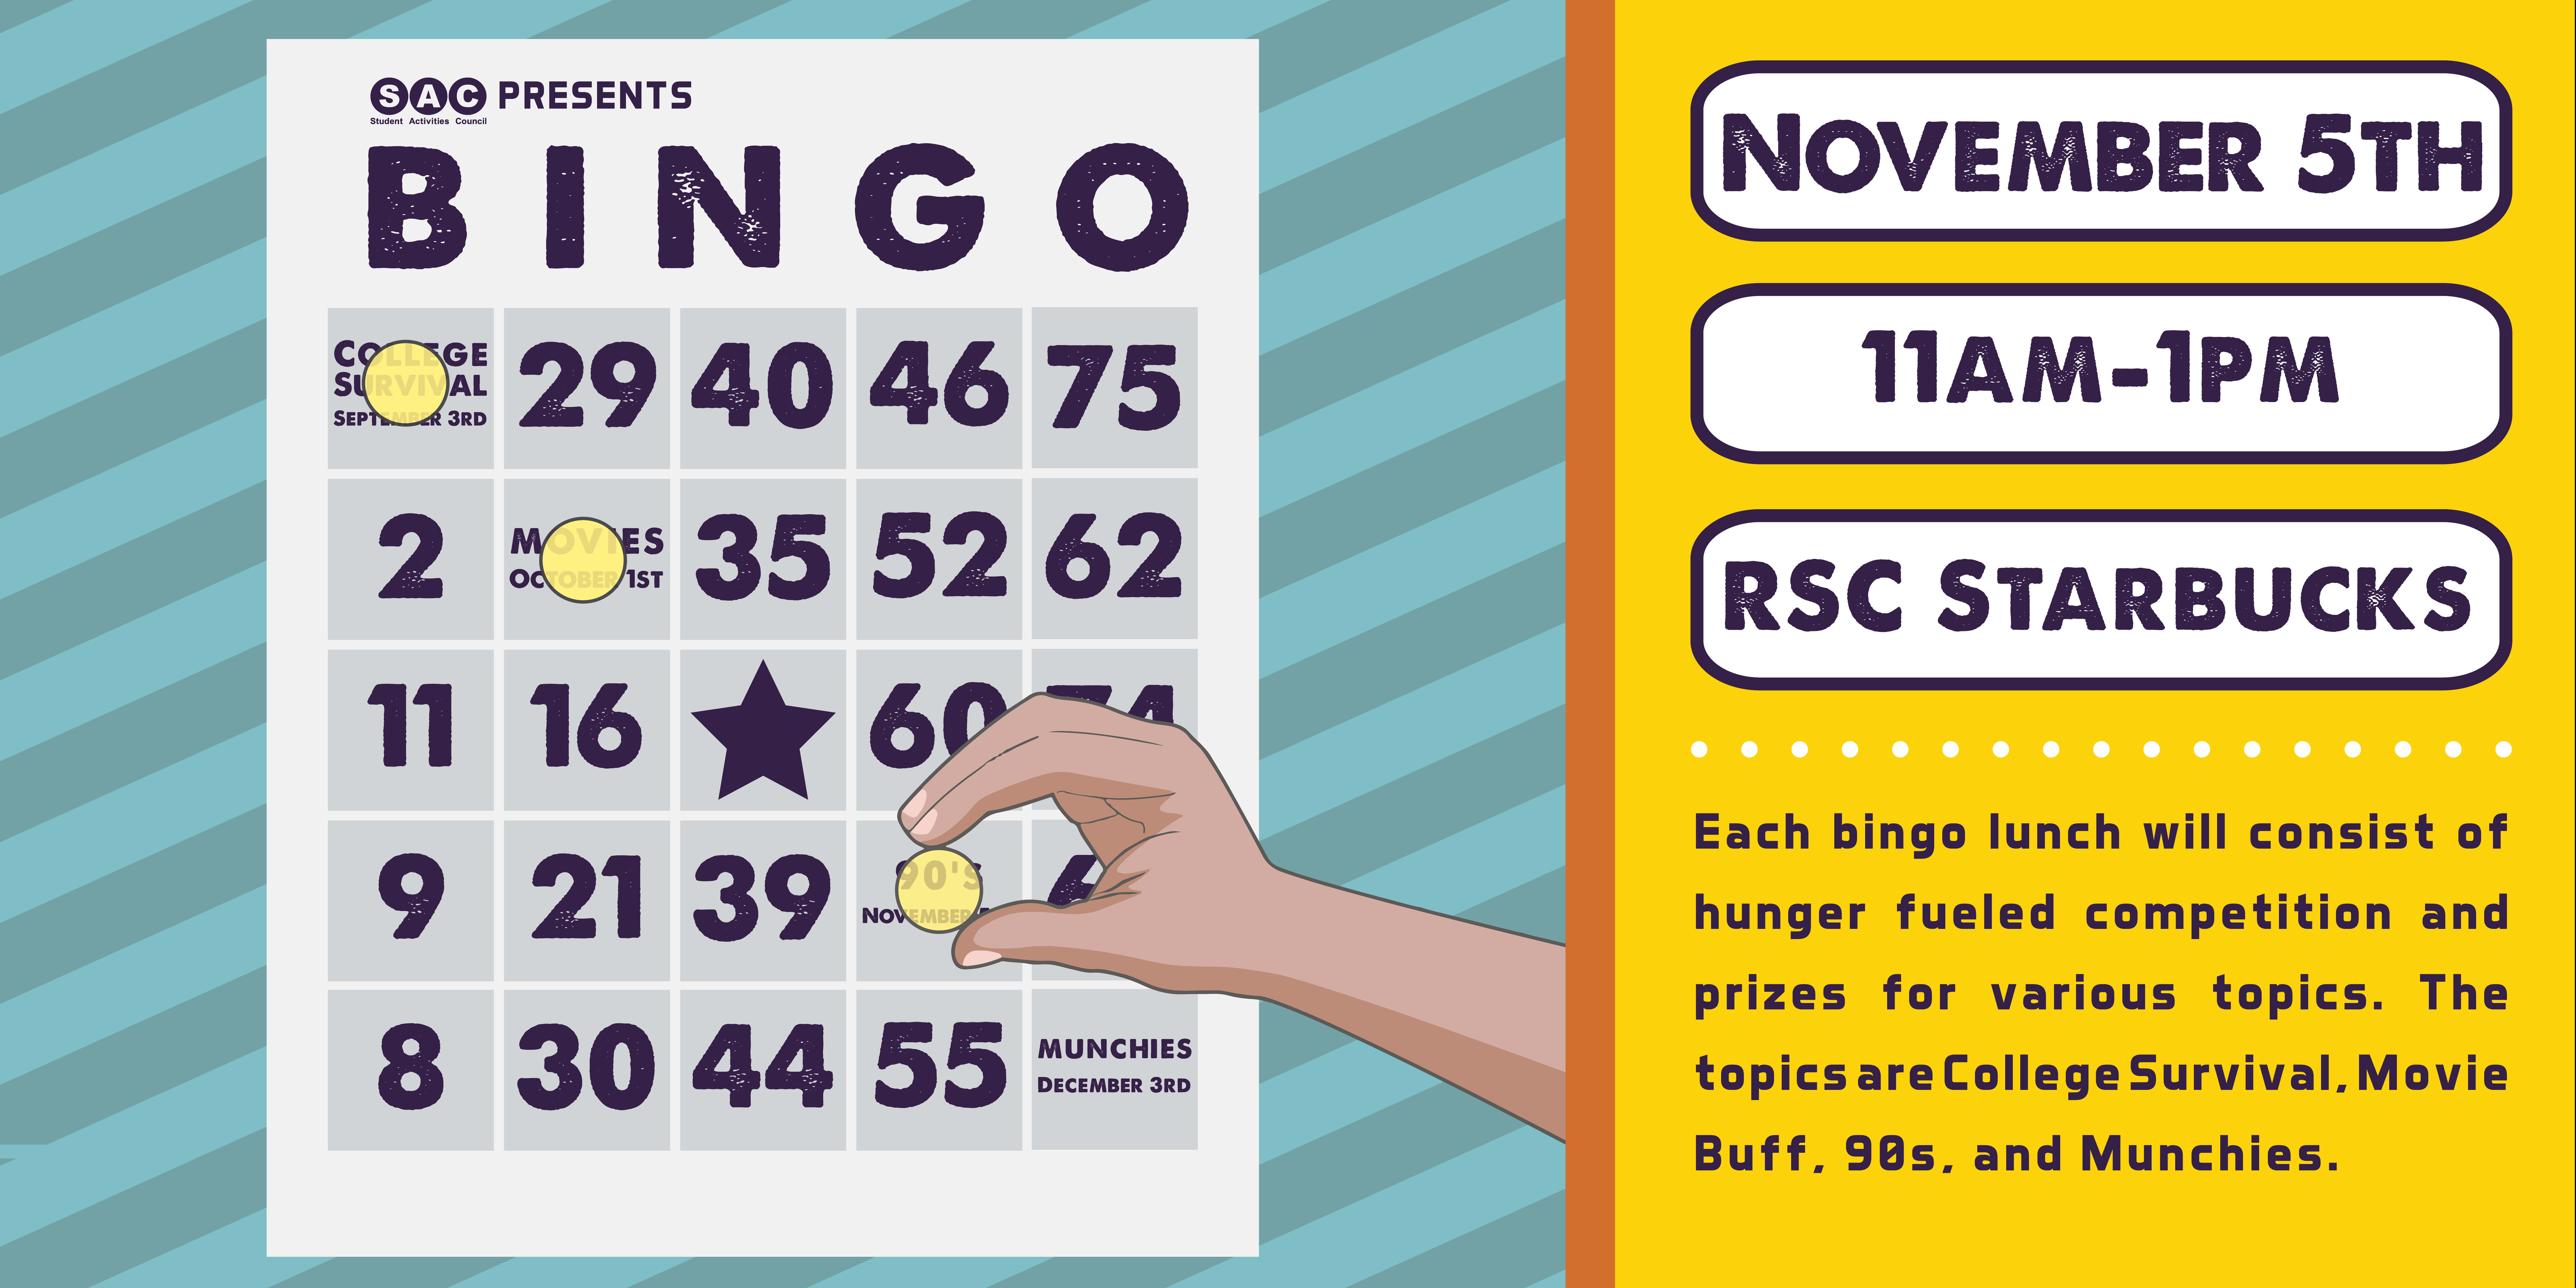 SAC Presents 90s Lunchtime Bingo - November 5 11AM-1PM RSC Starbucks - Each bingo lunch will consist of hunger-fueled competition and prizes for various topics. The topics are College Survival, Movie Buff, 90s, and Munchies.